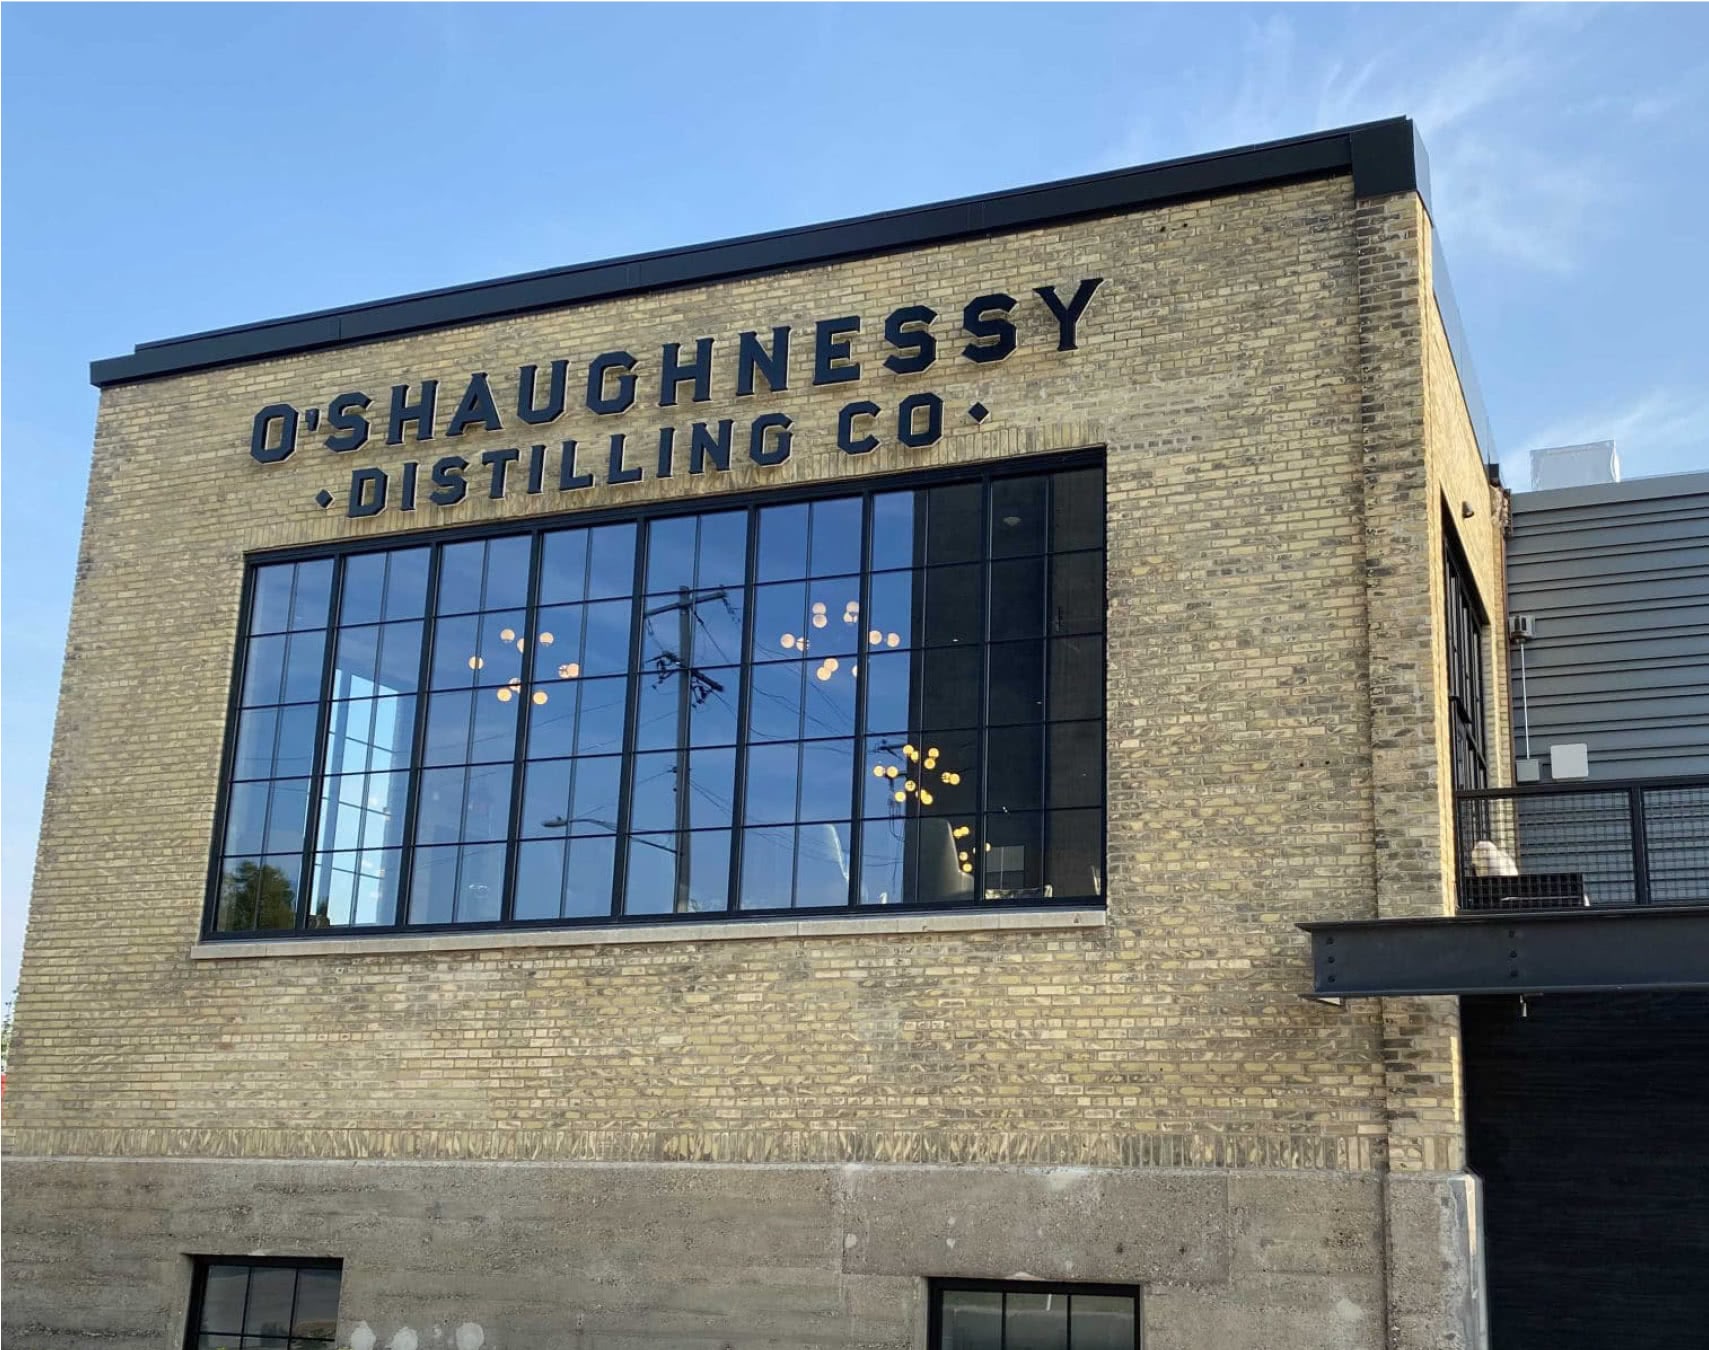 Photo O’Shaughnessy Distilling Co. building sign window